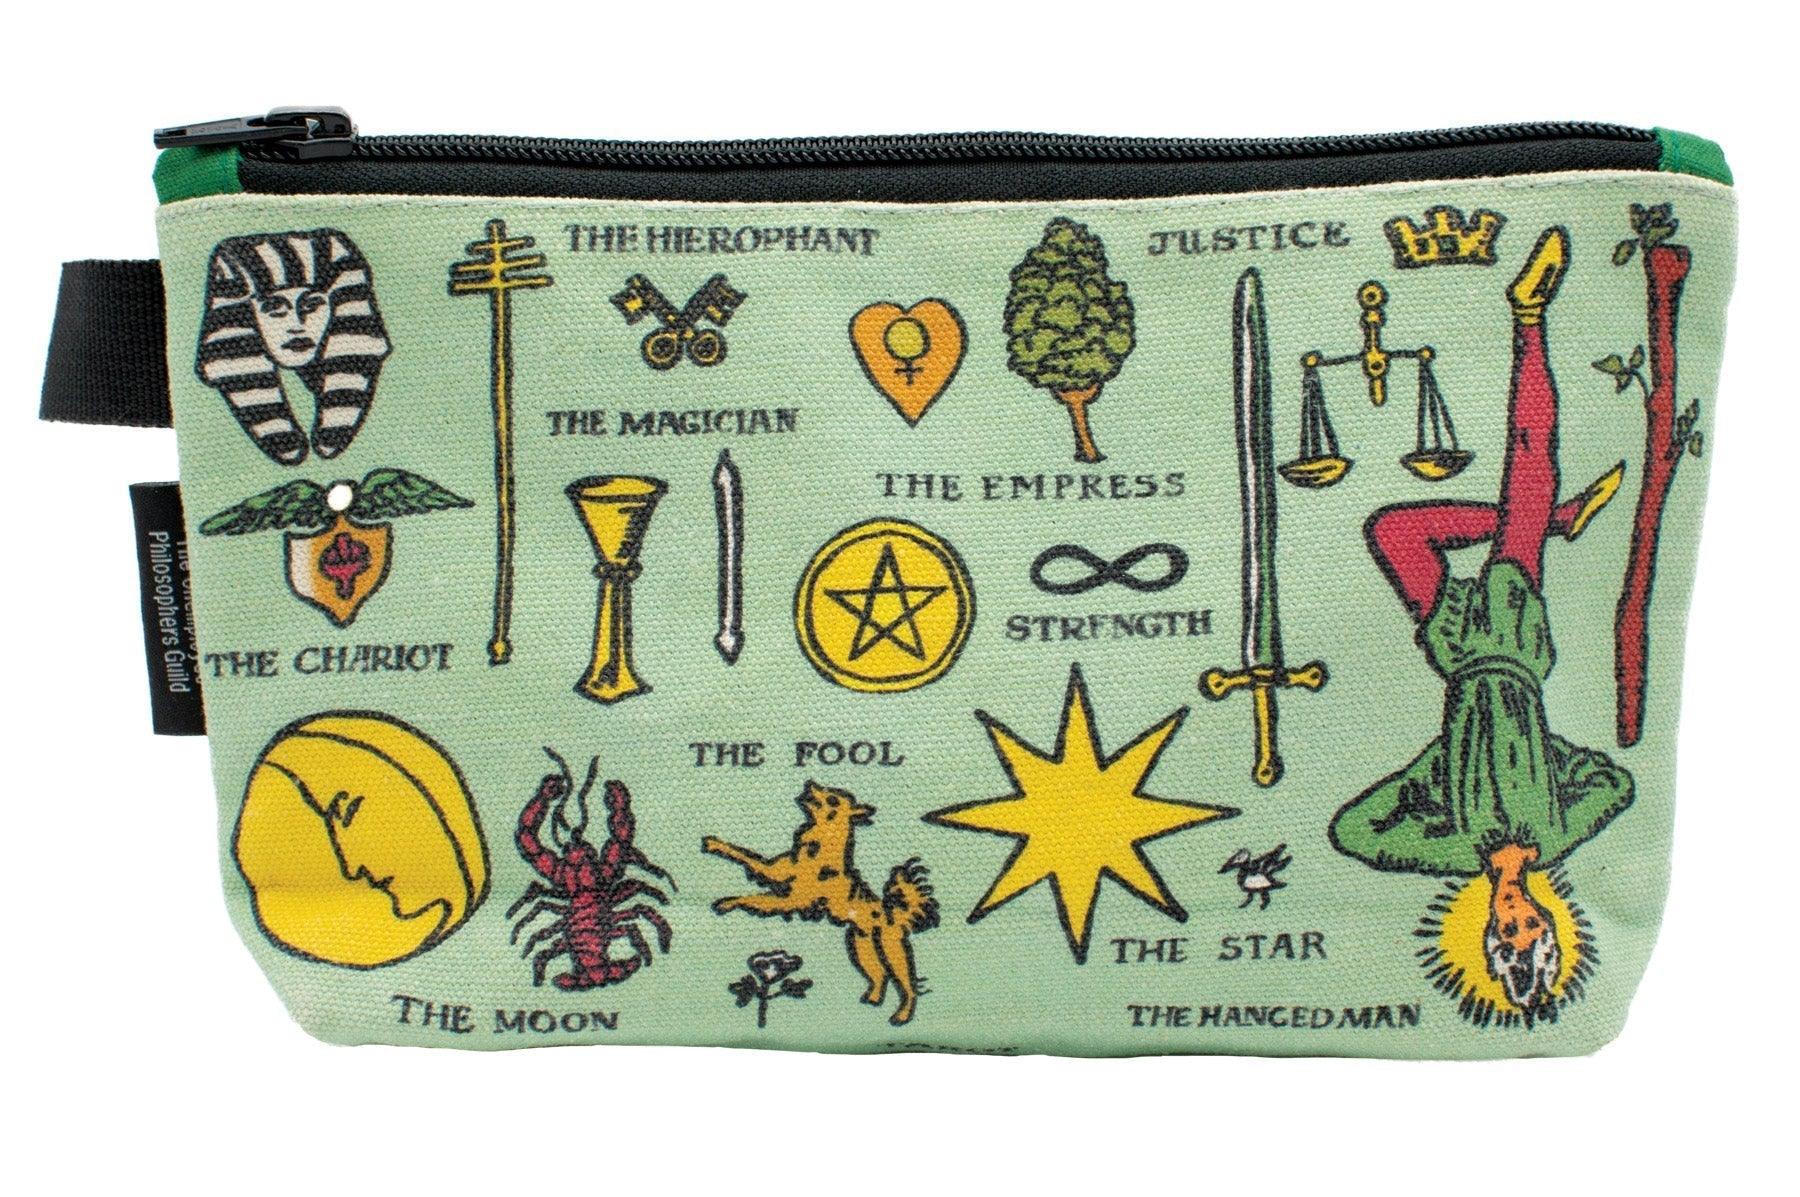 Rider Waite Tarot Images Zipper Bag  Smart and Funny Gifts by UPG – The  Unemployed Philosophers Guild